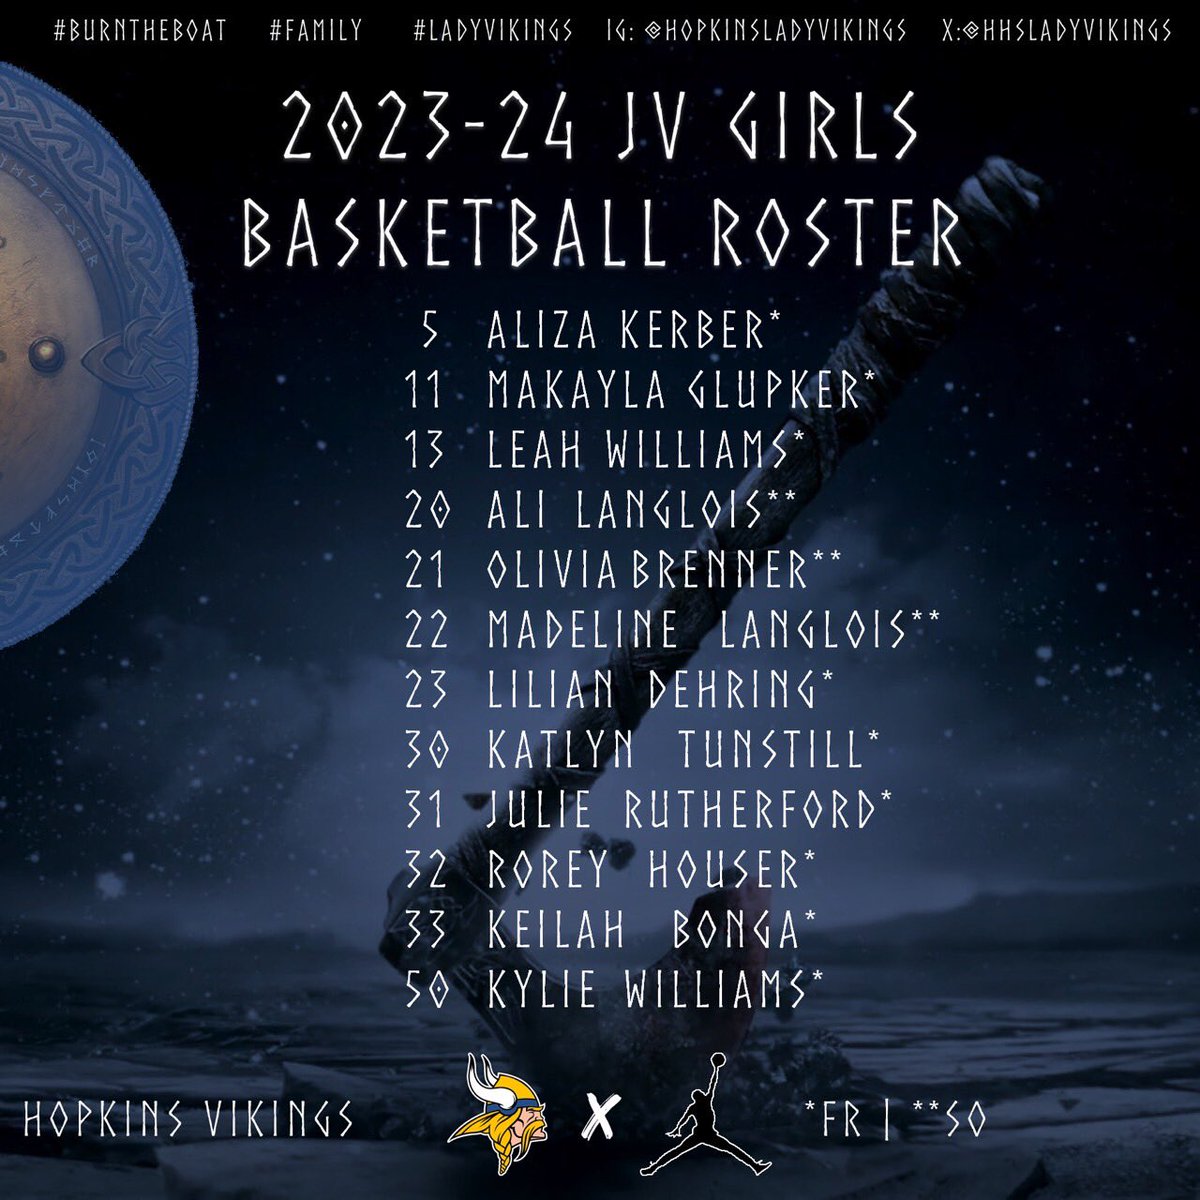 Rosters are set! Meet your 2023-2024 Lady Vikings!

#LadyVikings
#family
#BurnTheBoat